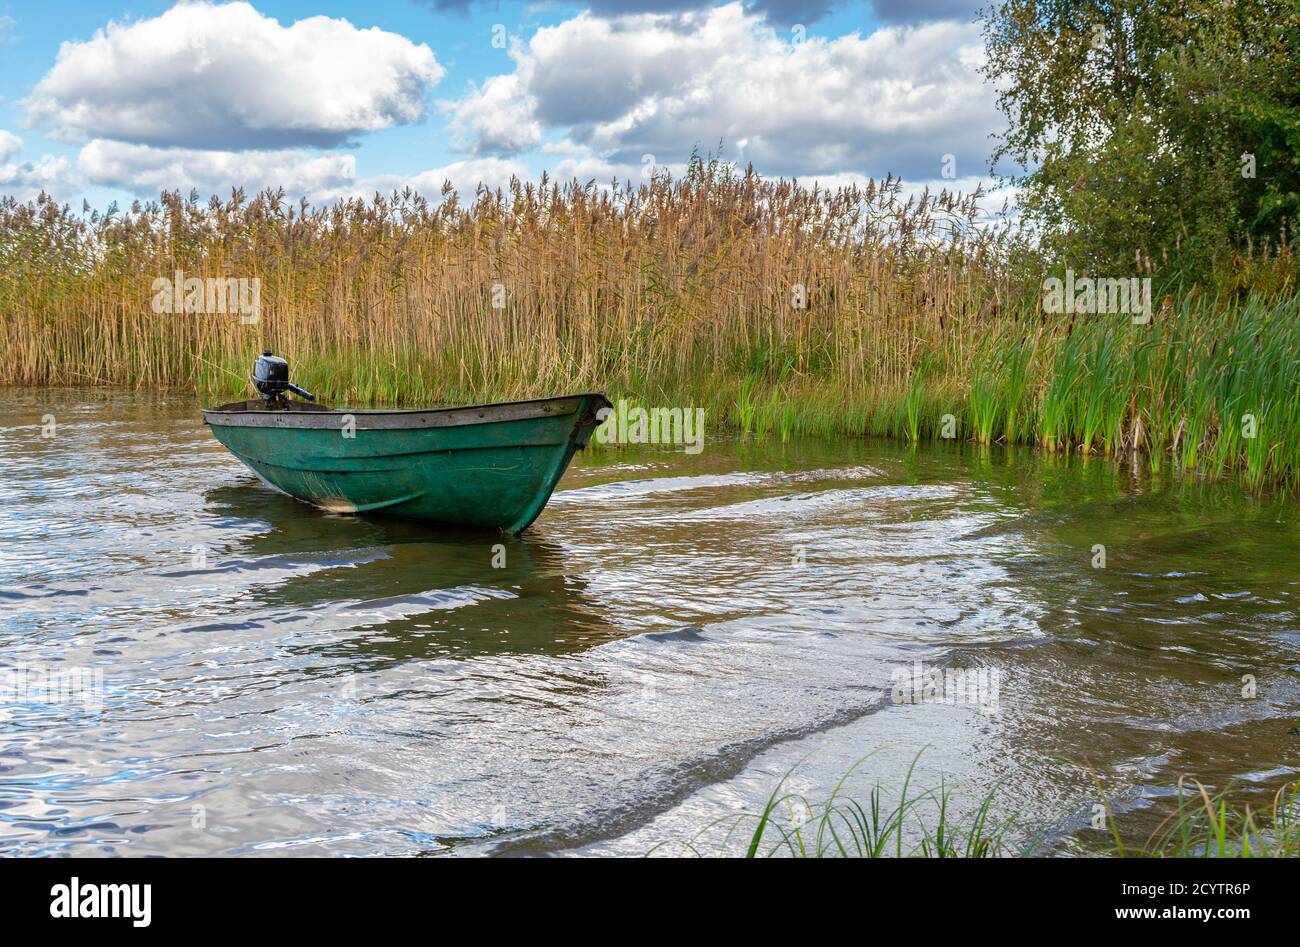 https://c8.alamy.com/comp/2CYTR6P/plastic-fishing-boat-with-motor-on-the-lake-in-summer-day-nature-of-northern-countries-environmental-landscape-2CYTR6P.jpg